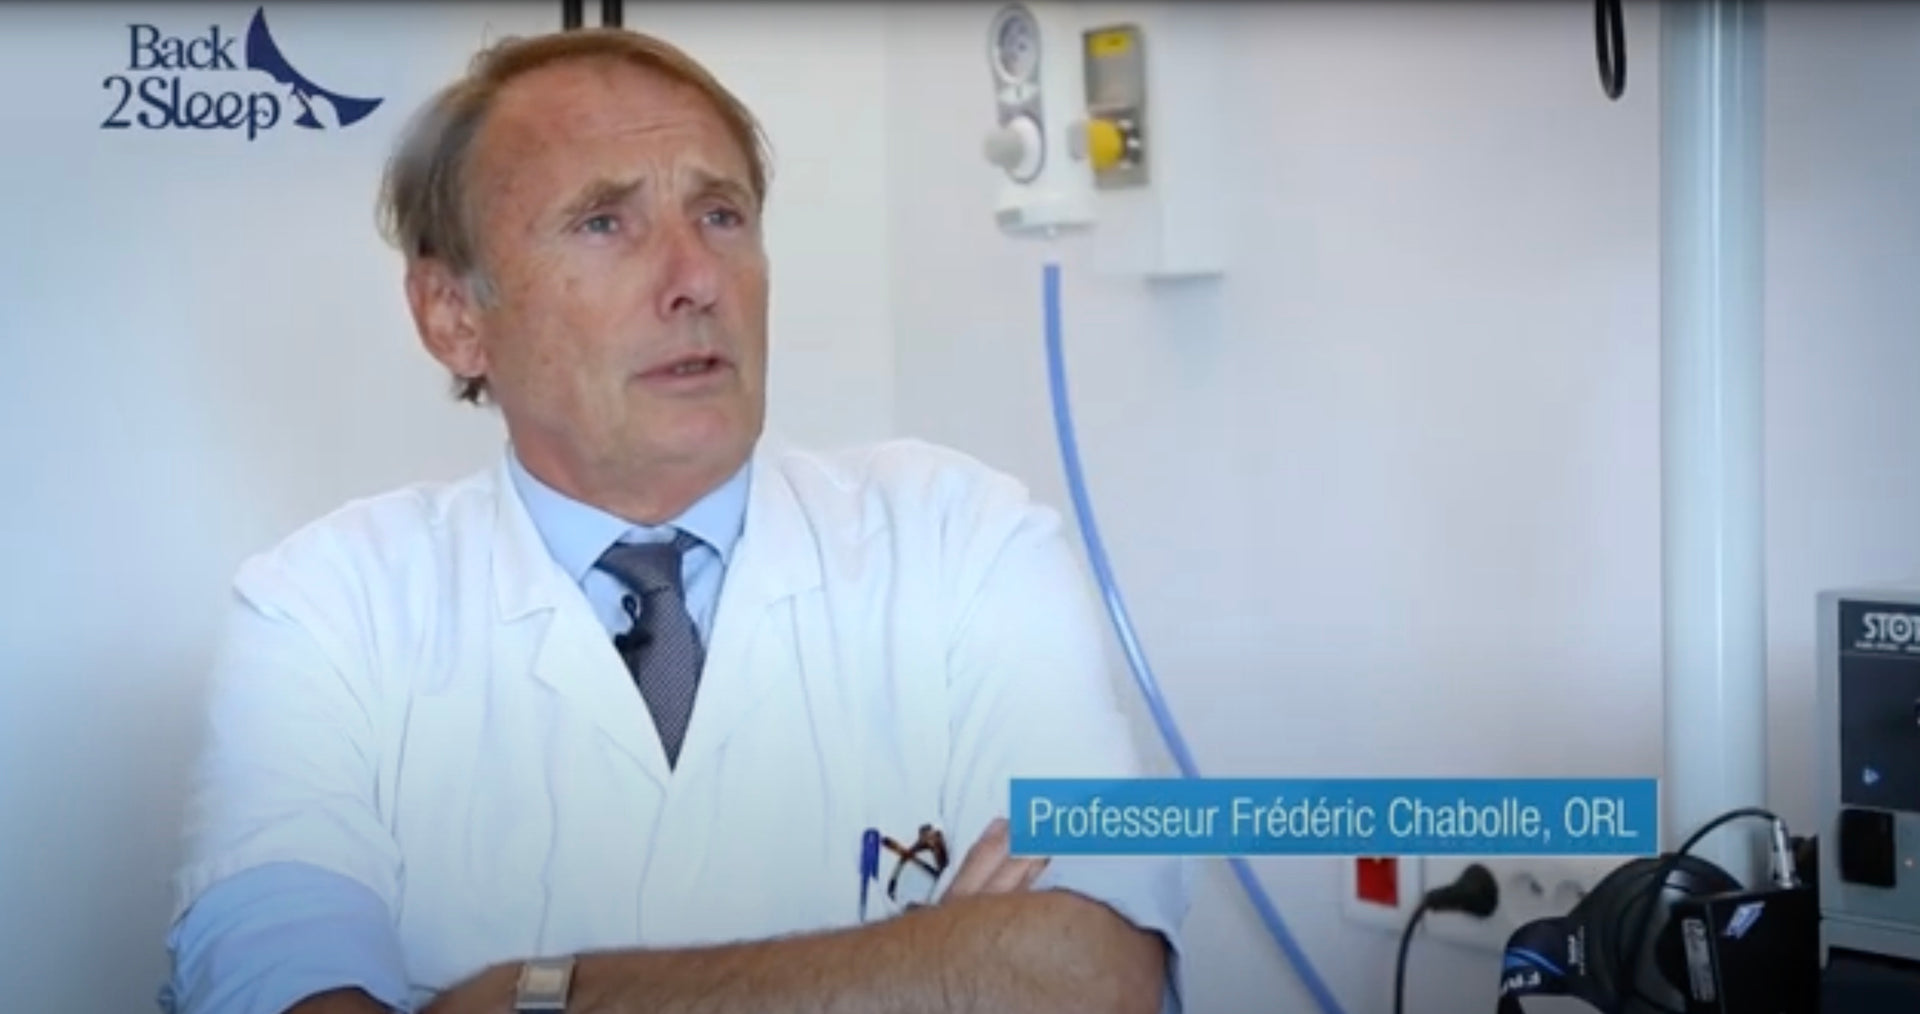 Carica il video: Professor Chabolle explains the causes of snoring, sleep apnea, and the mechanism of action of Back2Sleep (in French with English subtitles).